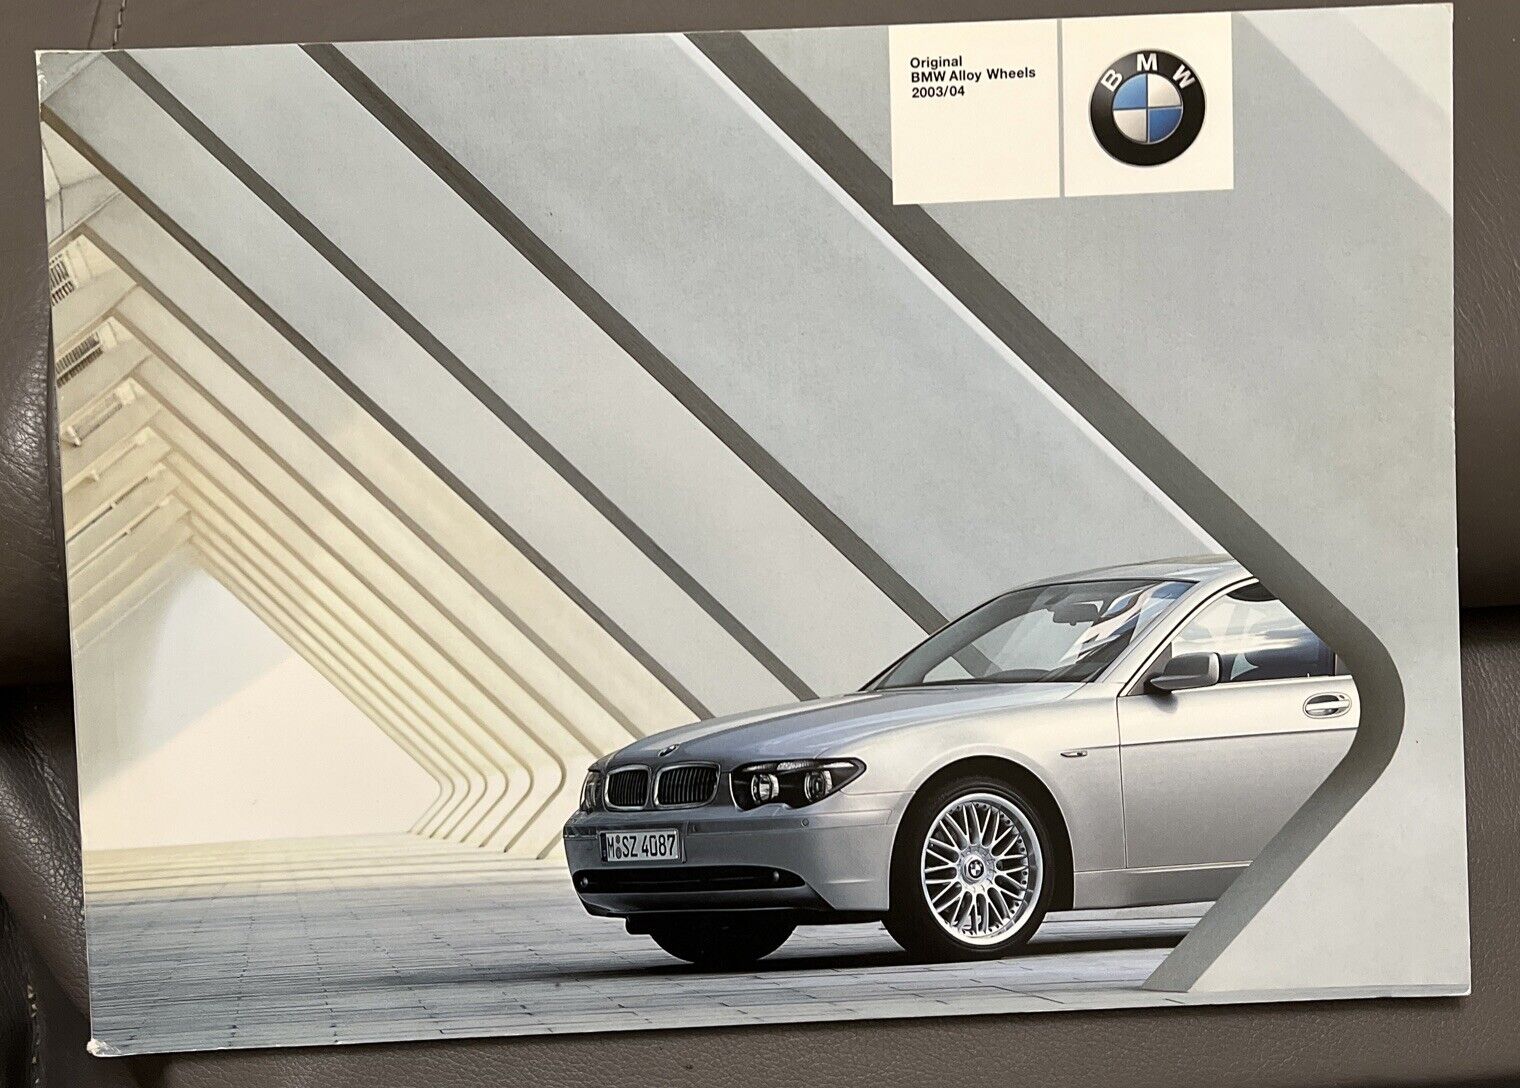 BMW OFFICIAL ALLOY WHEELS SALES BROCHURE 2003-2004 USA EDITION